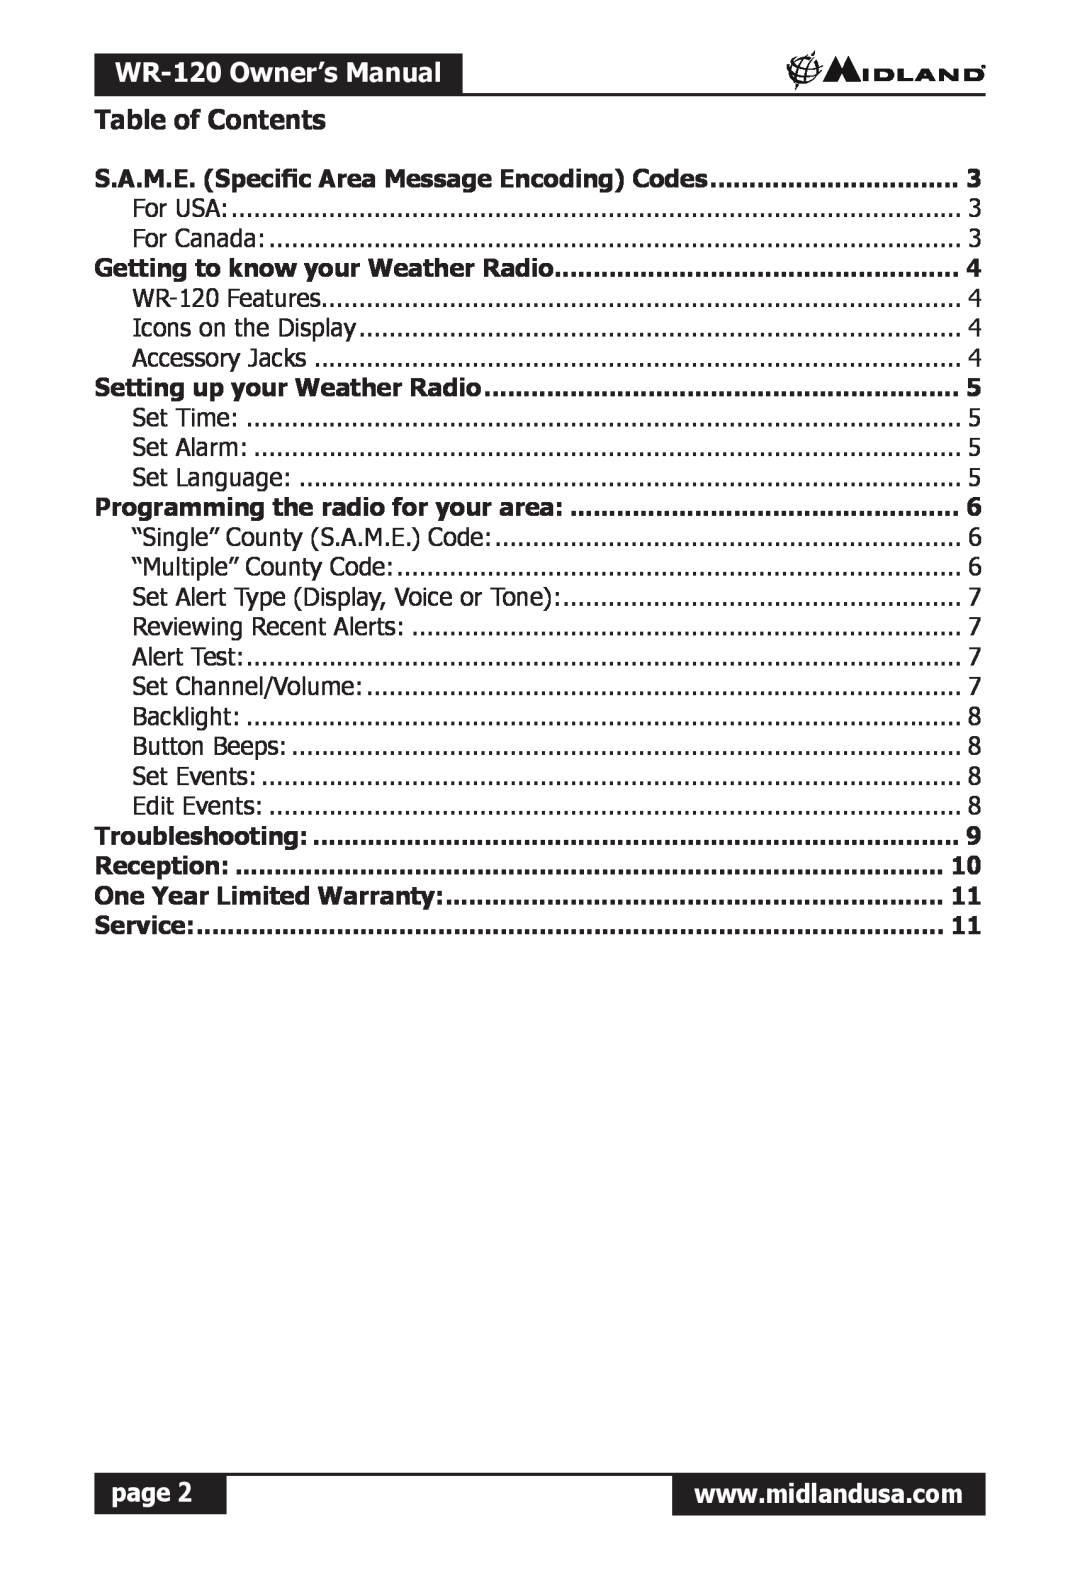 Midland Radio WR-120 owner manual Table of Contents, page, S.A.M.E. Specific Area Message Encoding Codes 